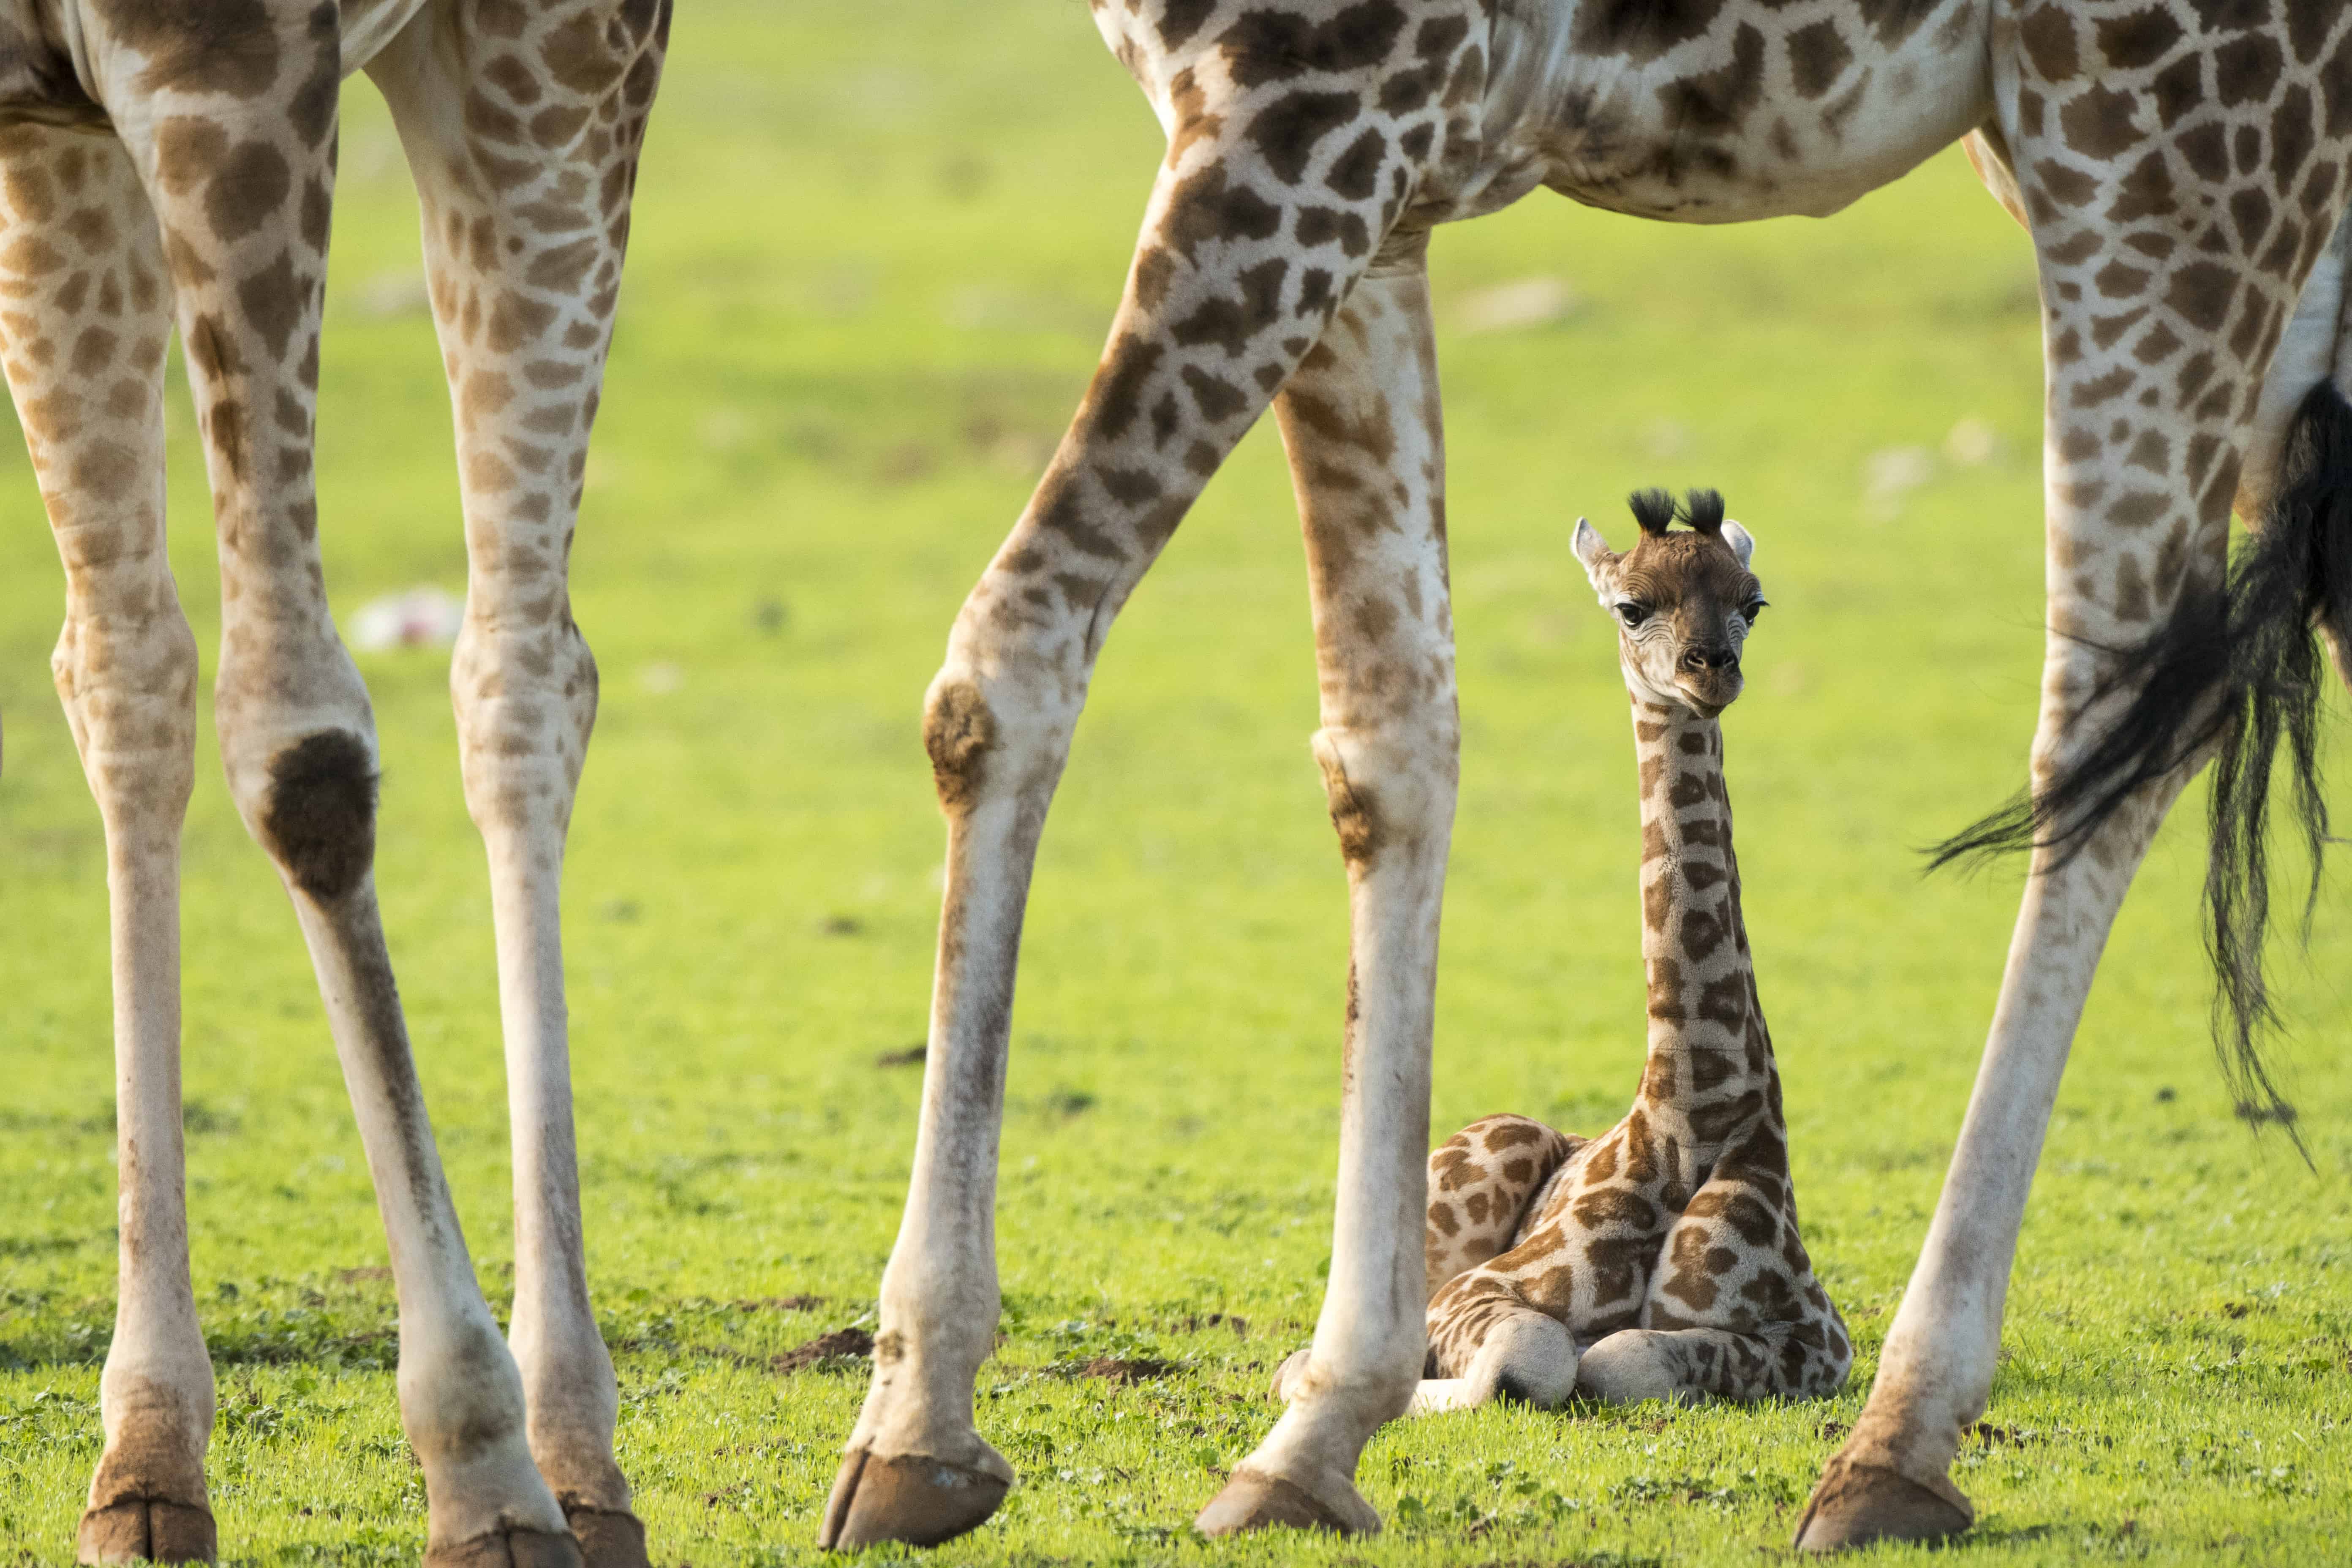 Five things you probably didn't know about Giraffe births